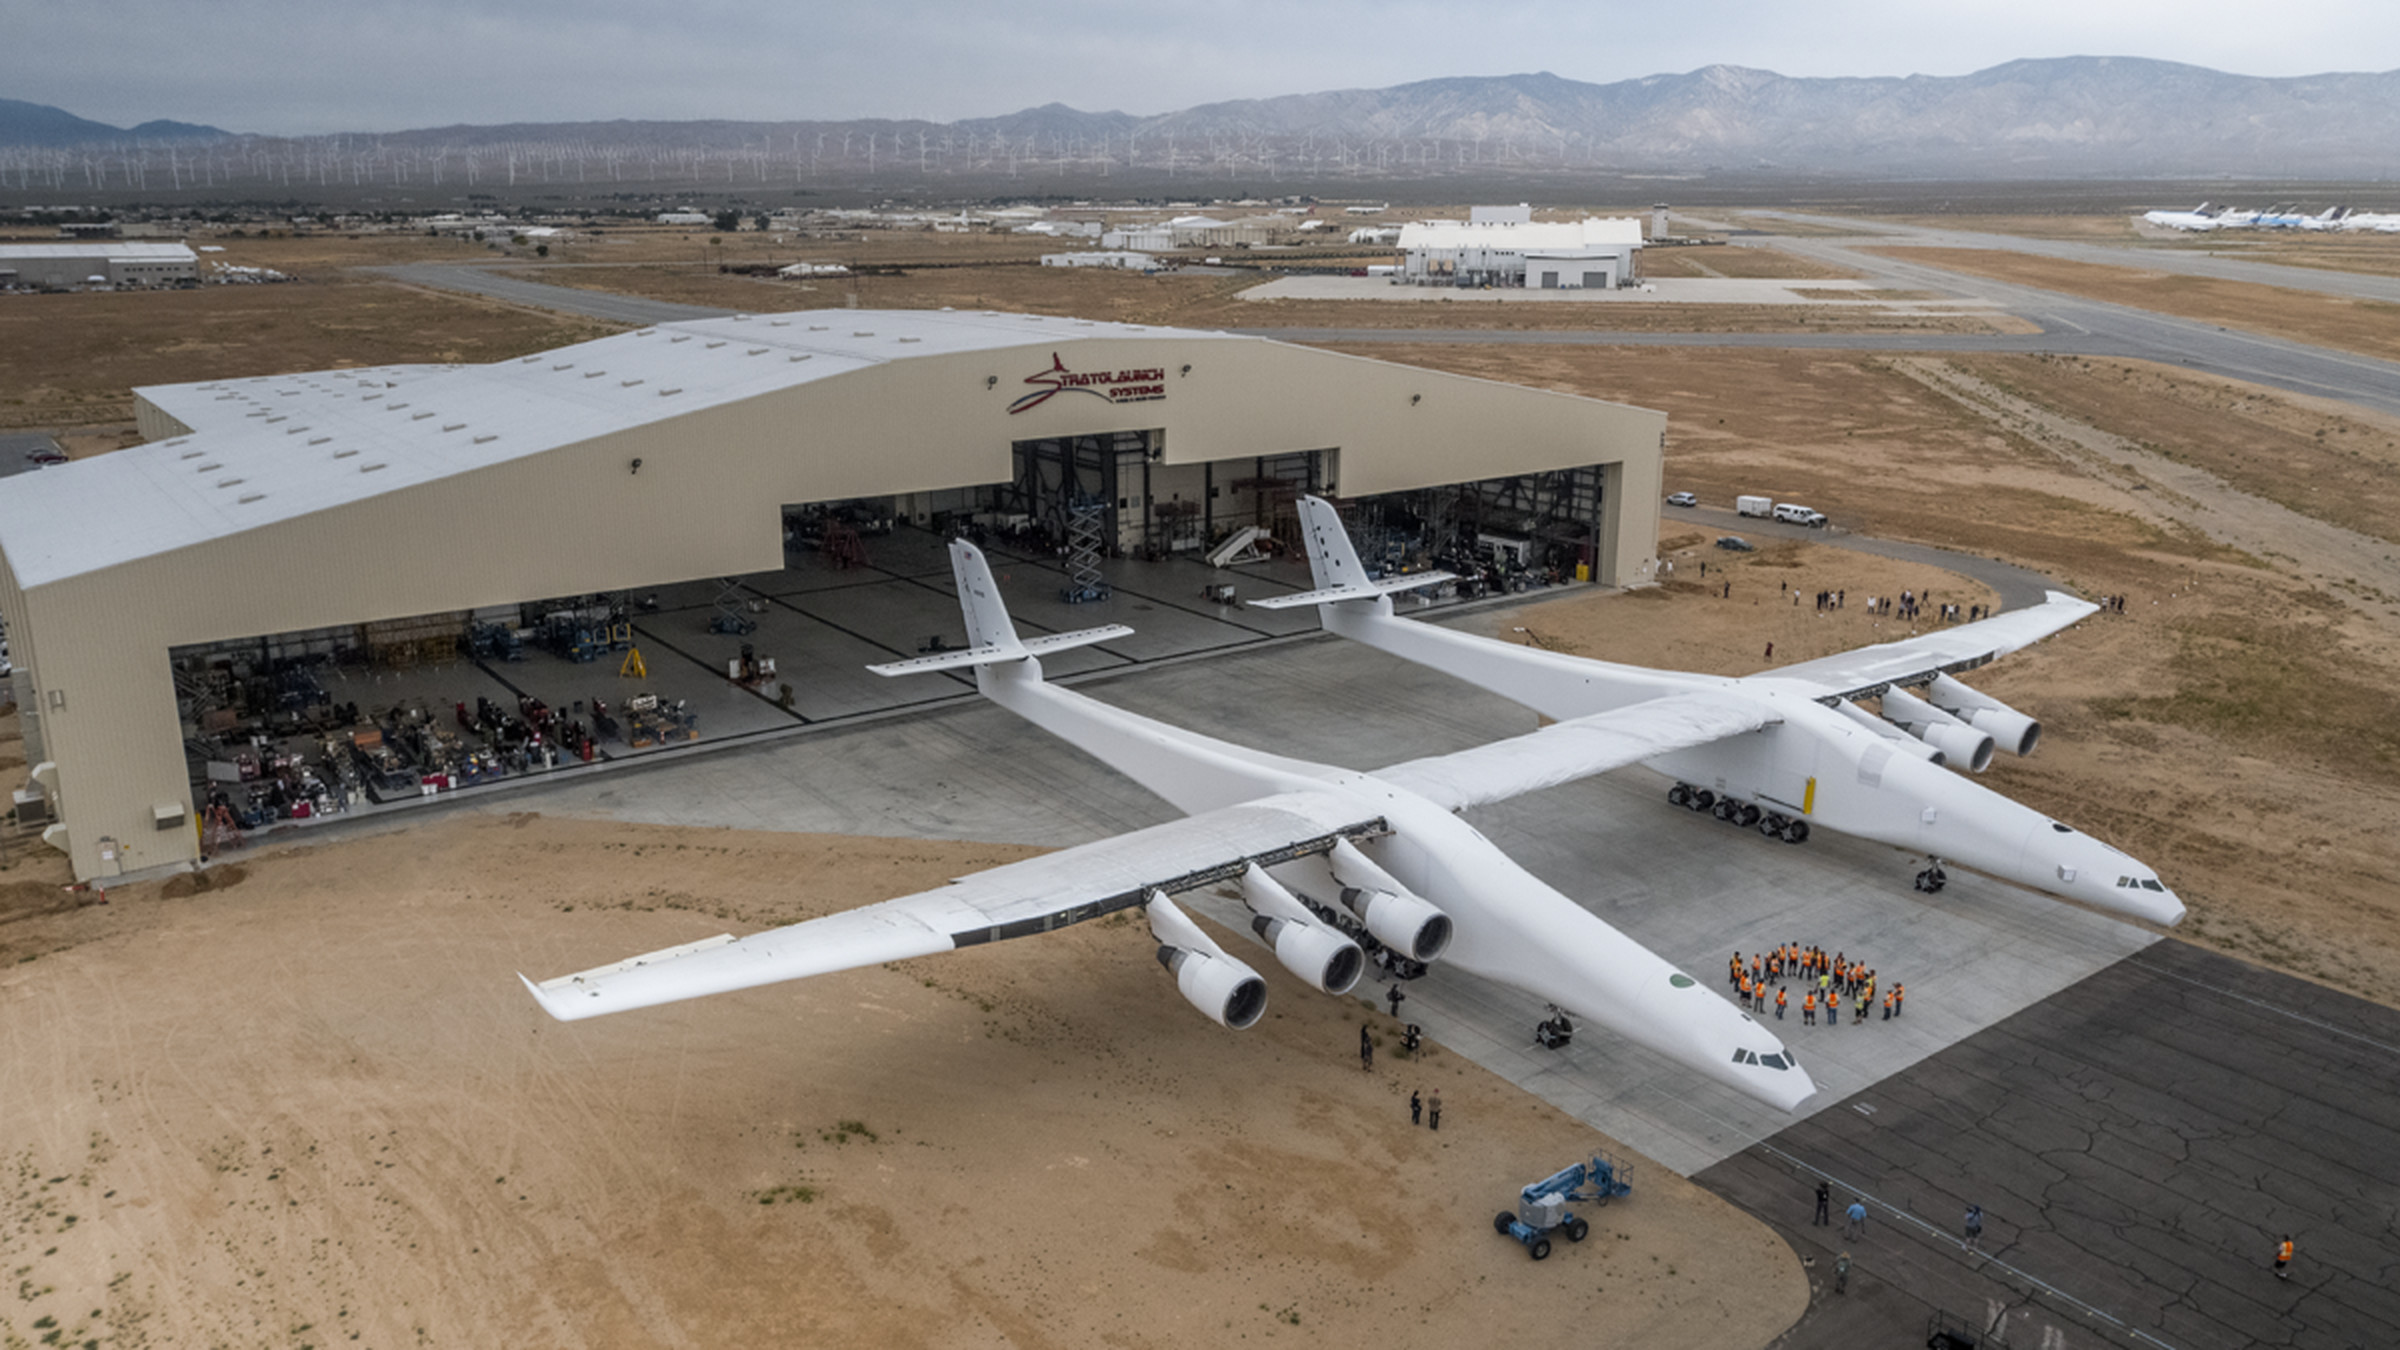 The Stratolaunch plane out of its hangar.